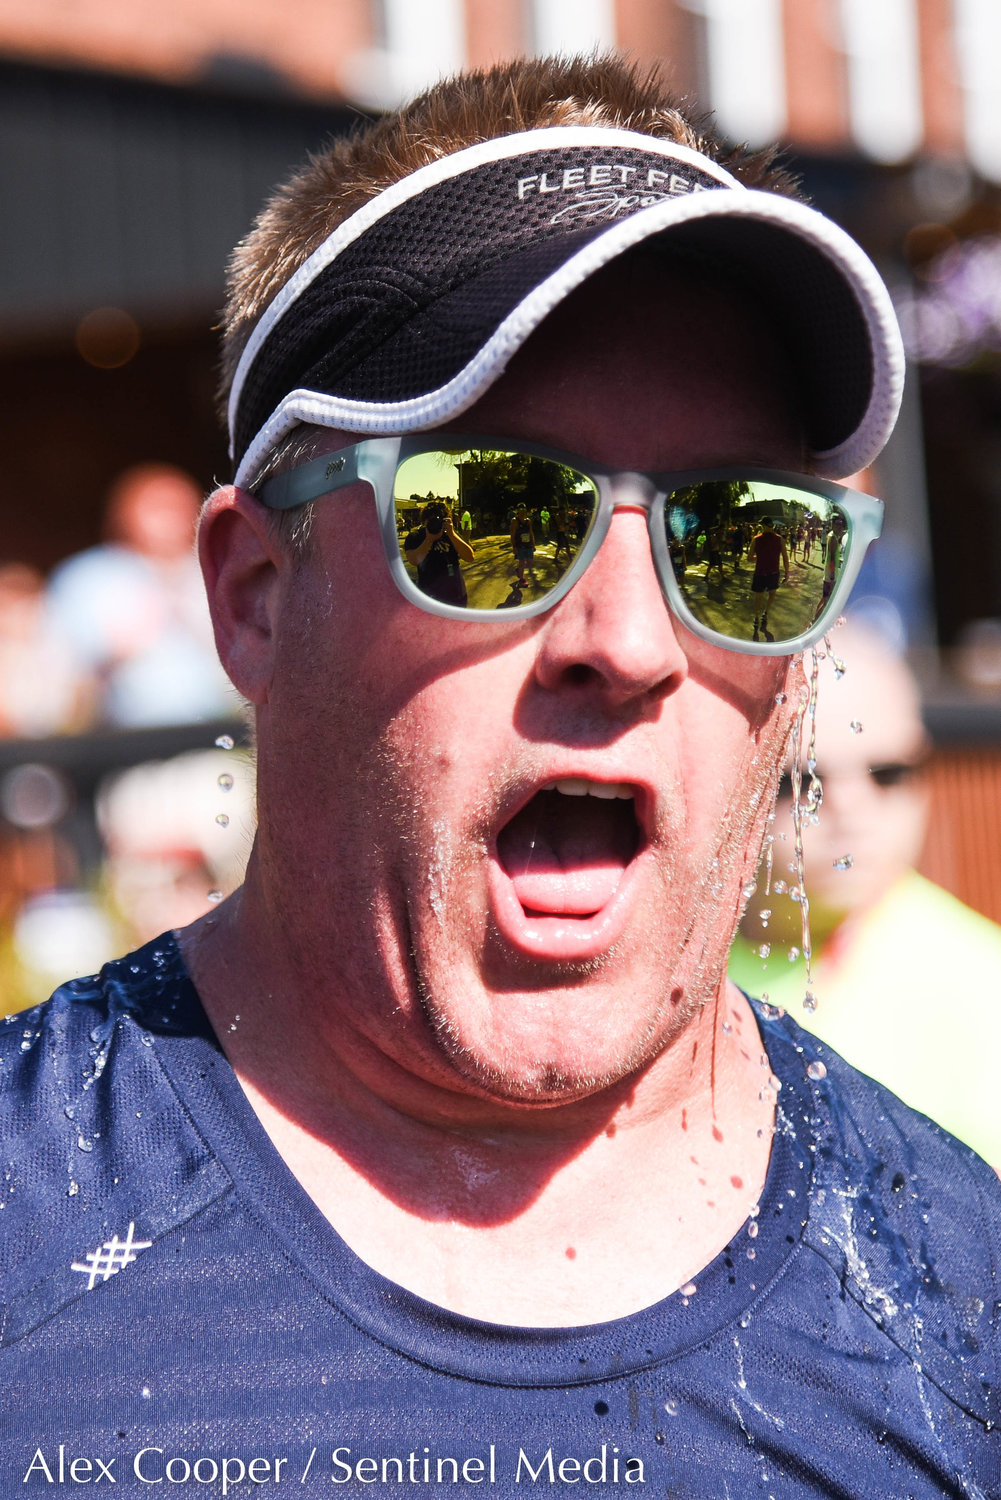 A man dumps water on his head after crossing the finish line during the 45th Boilermaker Road Race on Sunday.